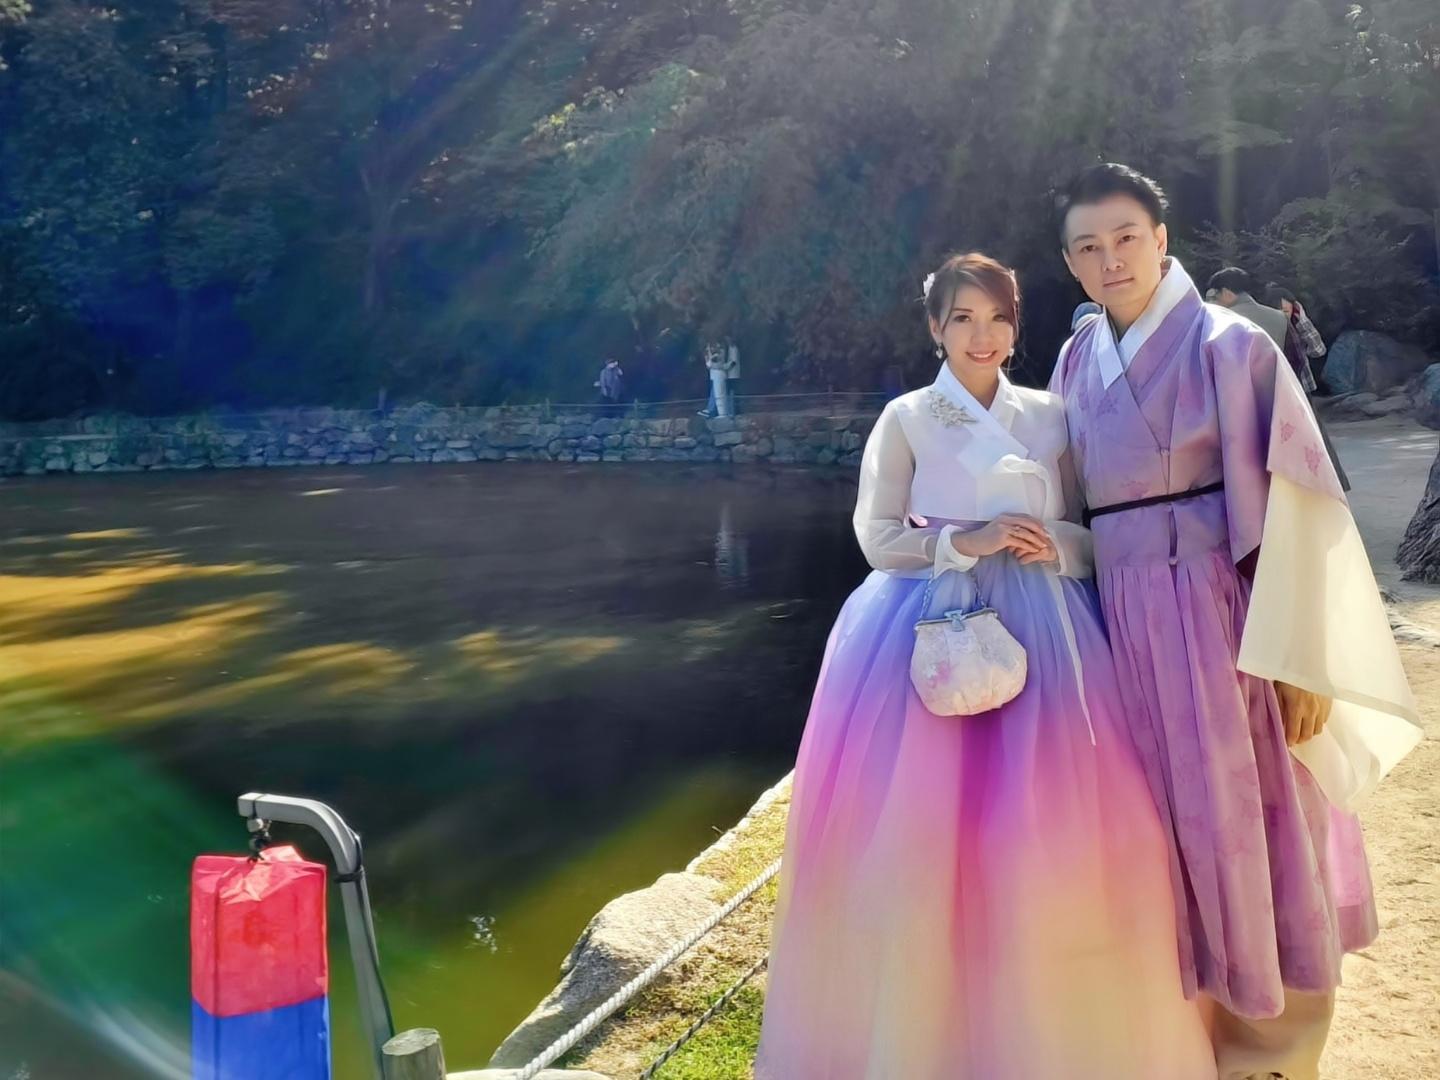 Group of happy people in traditional Korean hanboks and formal wear posing by the lake surrounded by trees in Gyeongbokgung, Seoul | Hanbok rental shop.